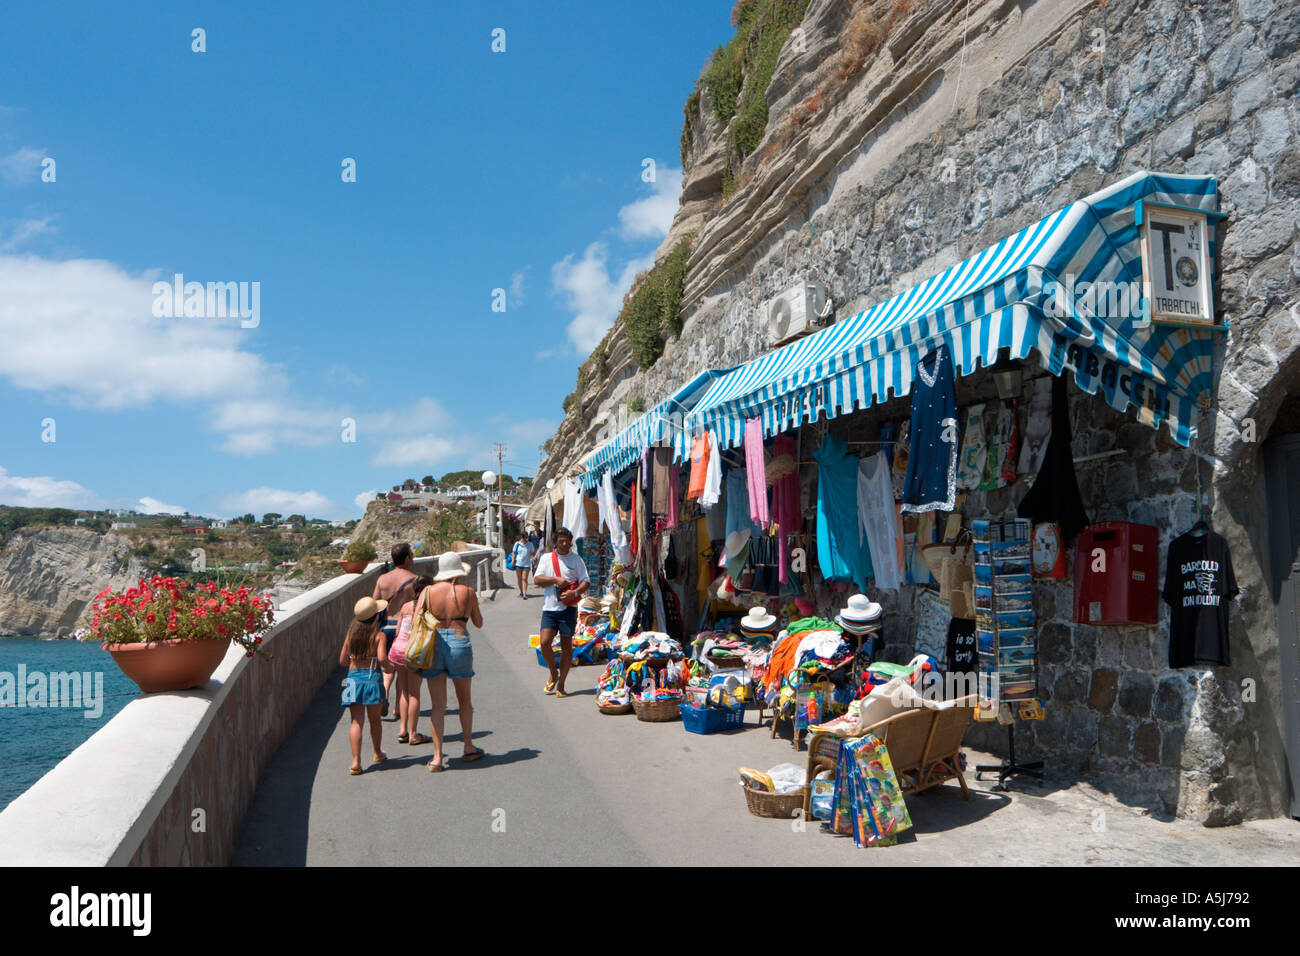 Shop on clifftop path, Sant Angelo, Ischia, Bay of Naples, Italy Stock Photo